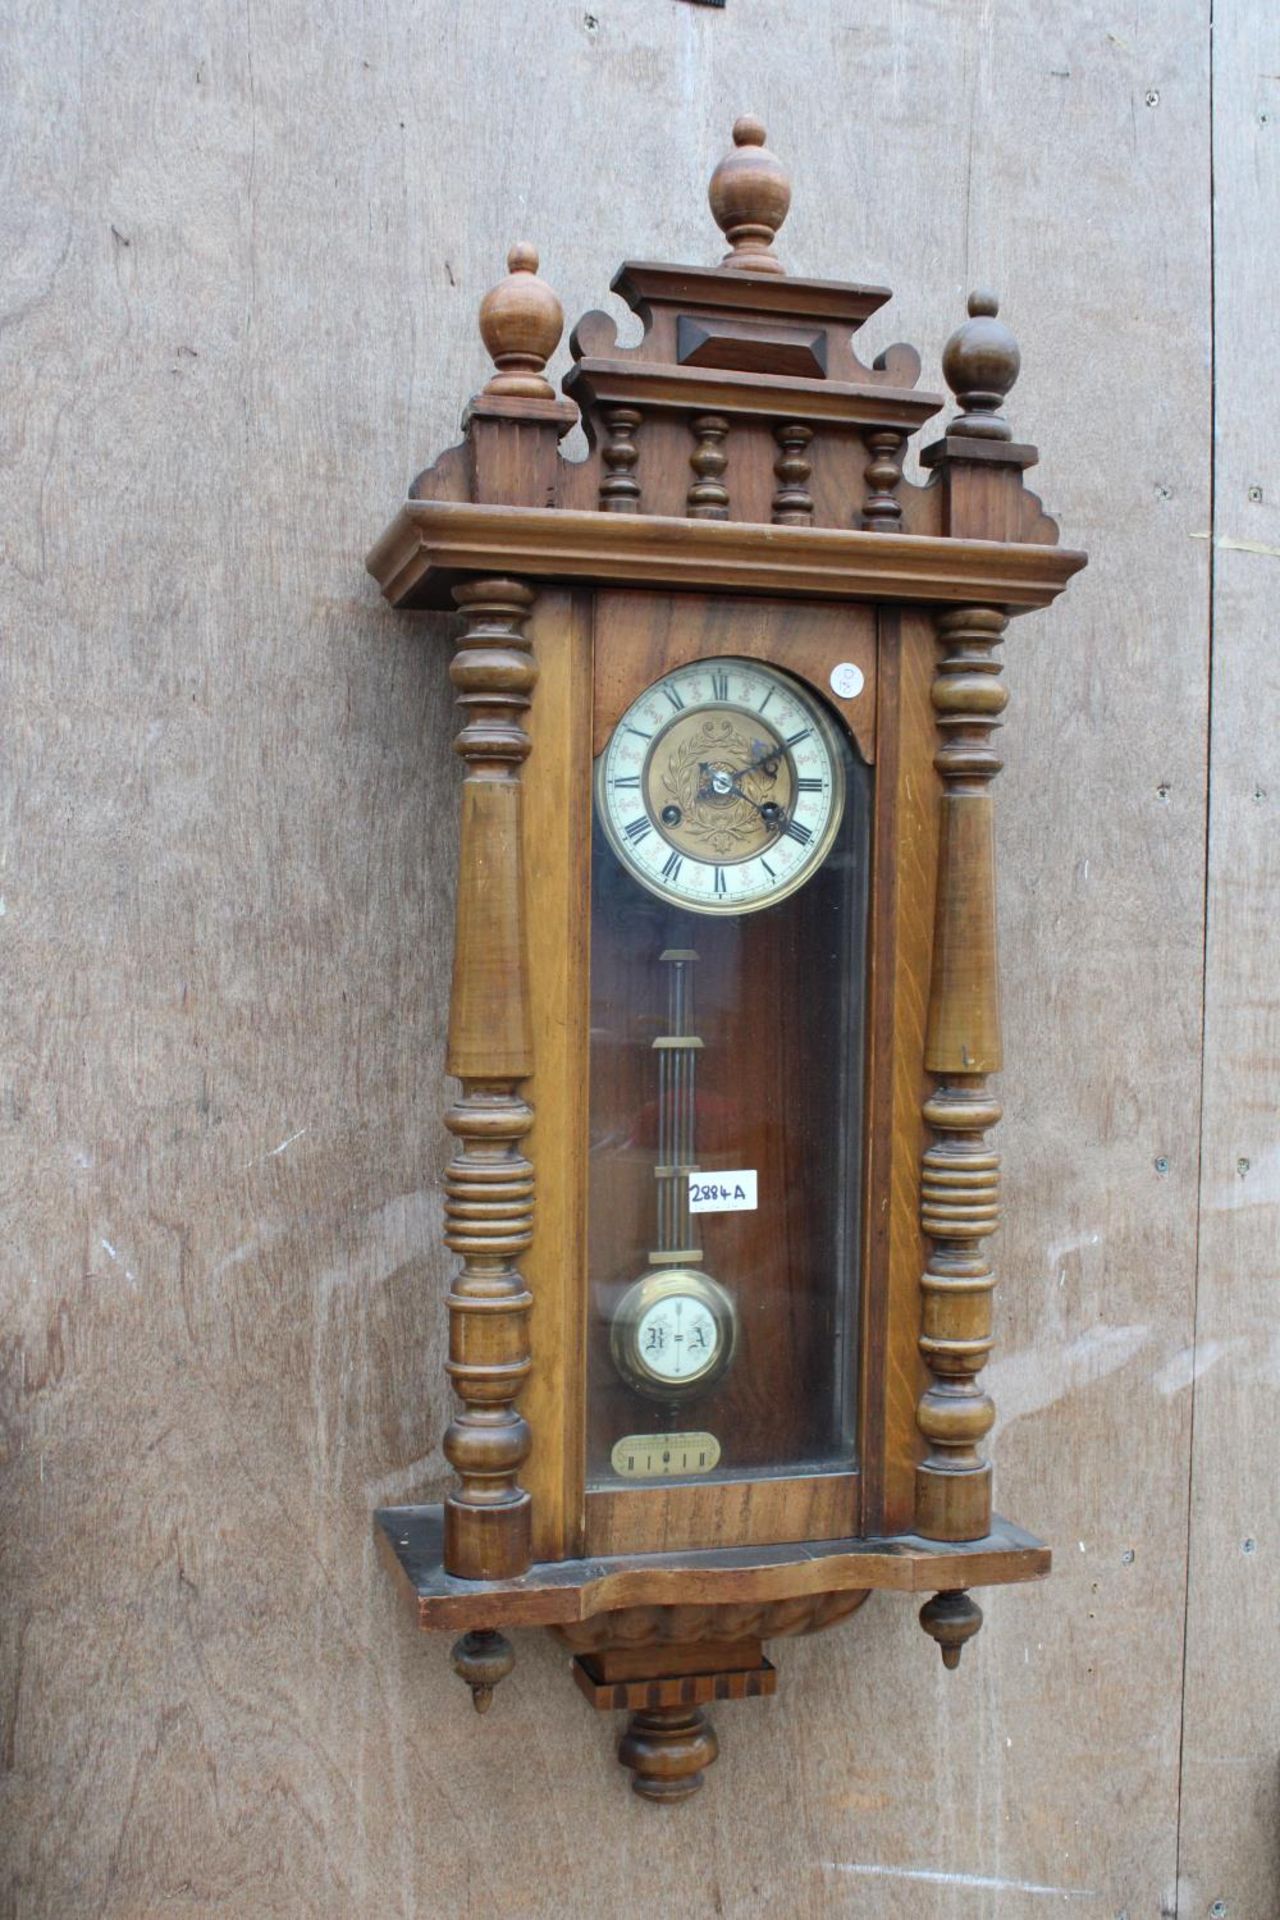 A VICTORIAN EIGHT DAY WALL CLOCK WITH ROMAN NUMERALS